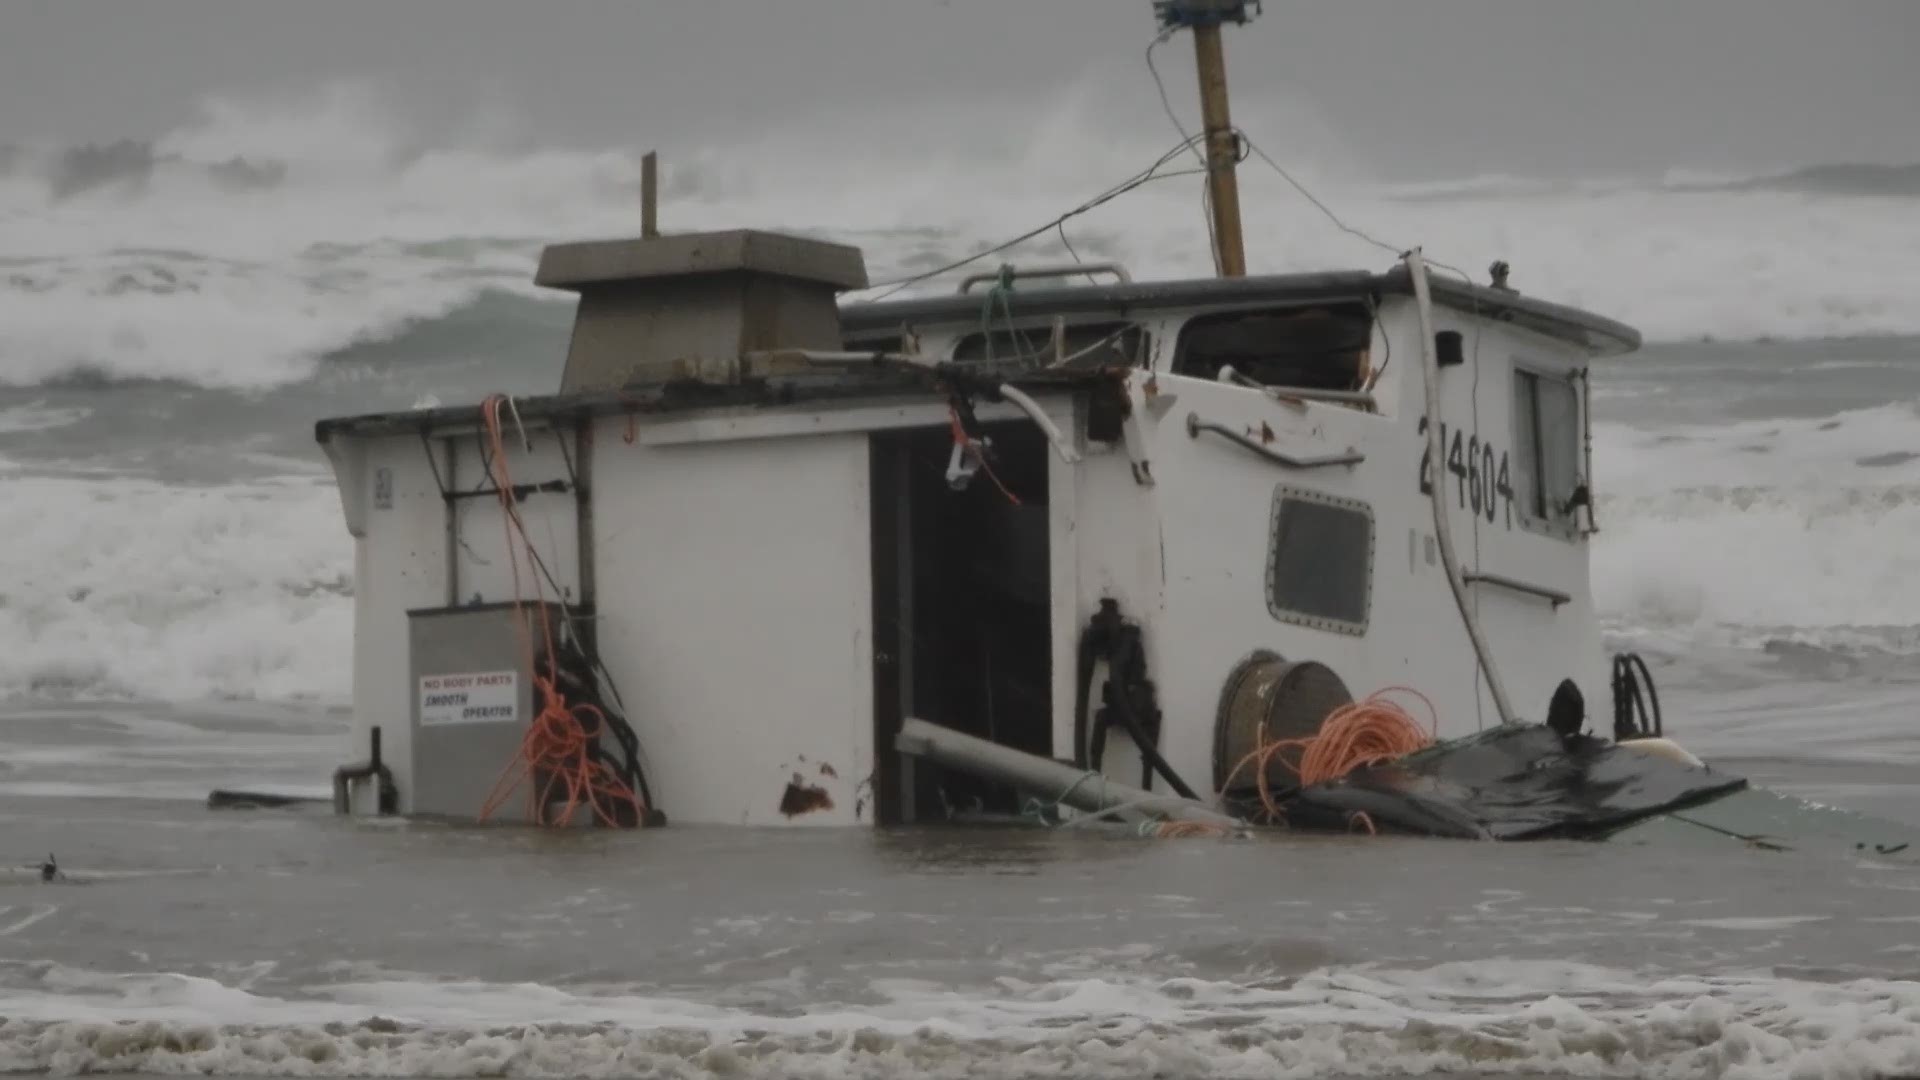 The Mary B II crab boat capsized about 10 p.m. Tuesday, according to the U.S. Coast Guard.

Three fisherman died in the accident, a Coast Guard spokesman told KGW Wednesday morning.